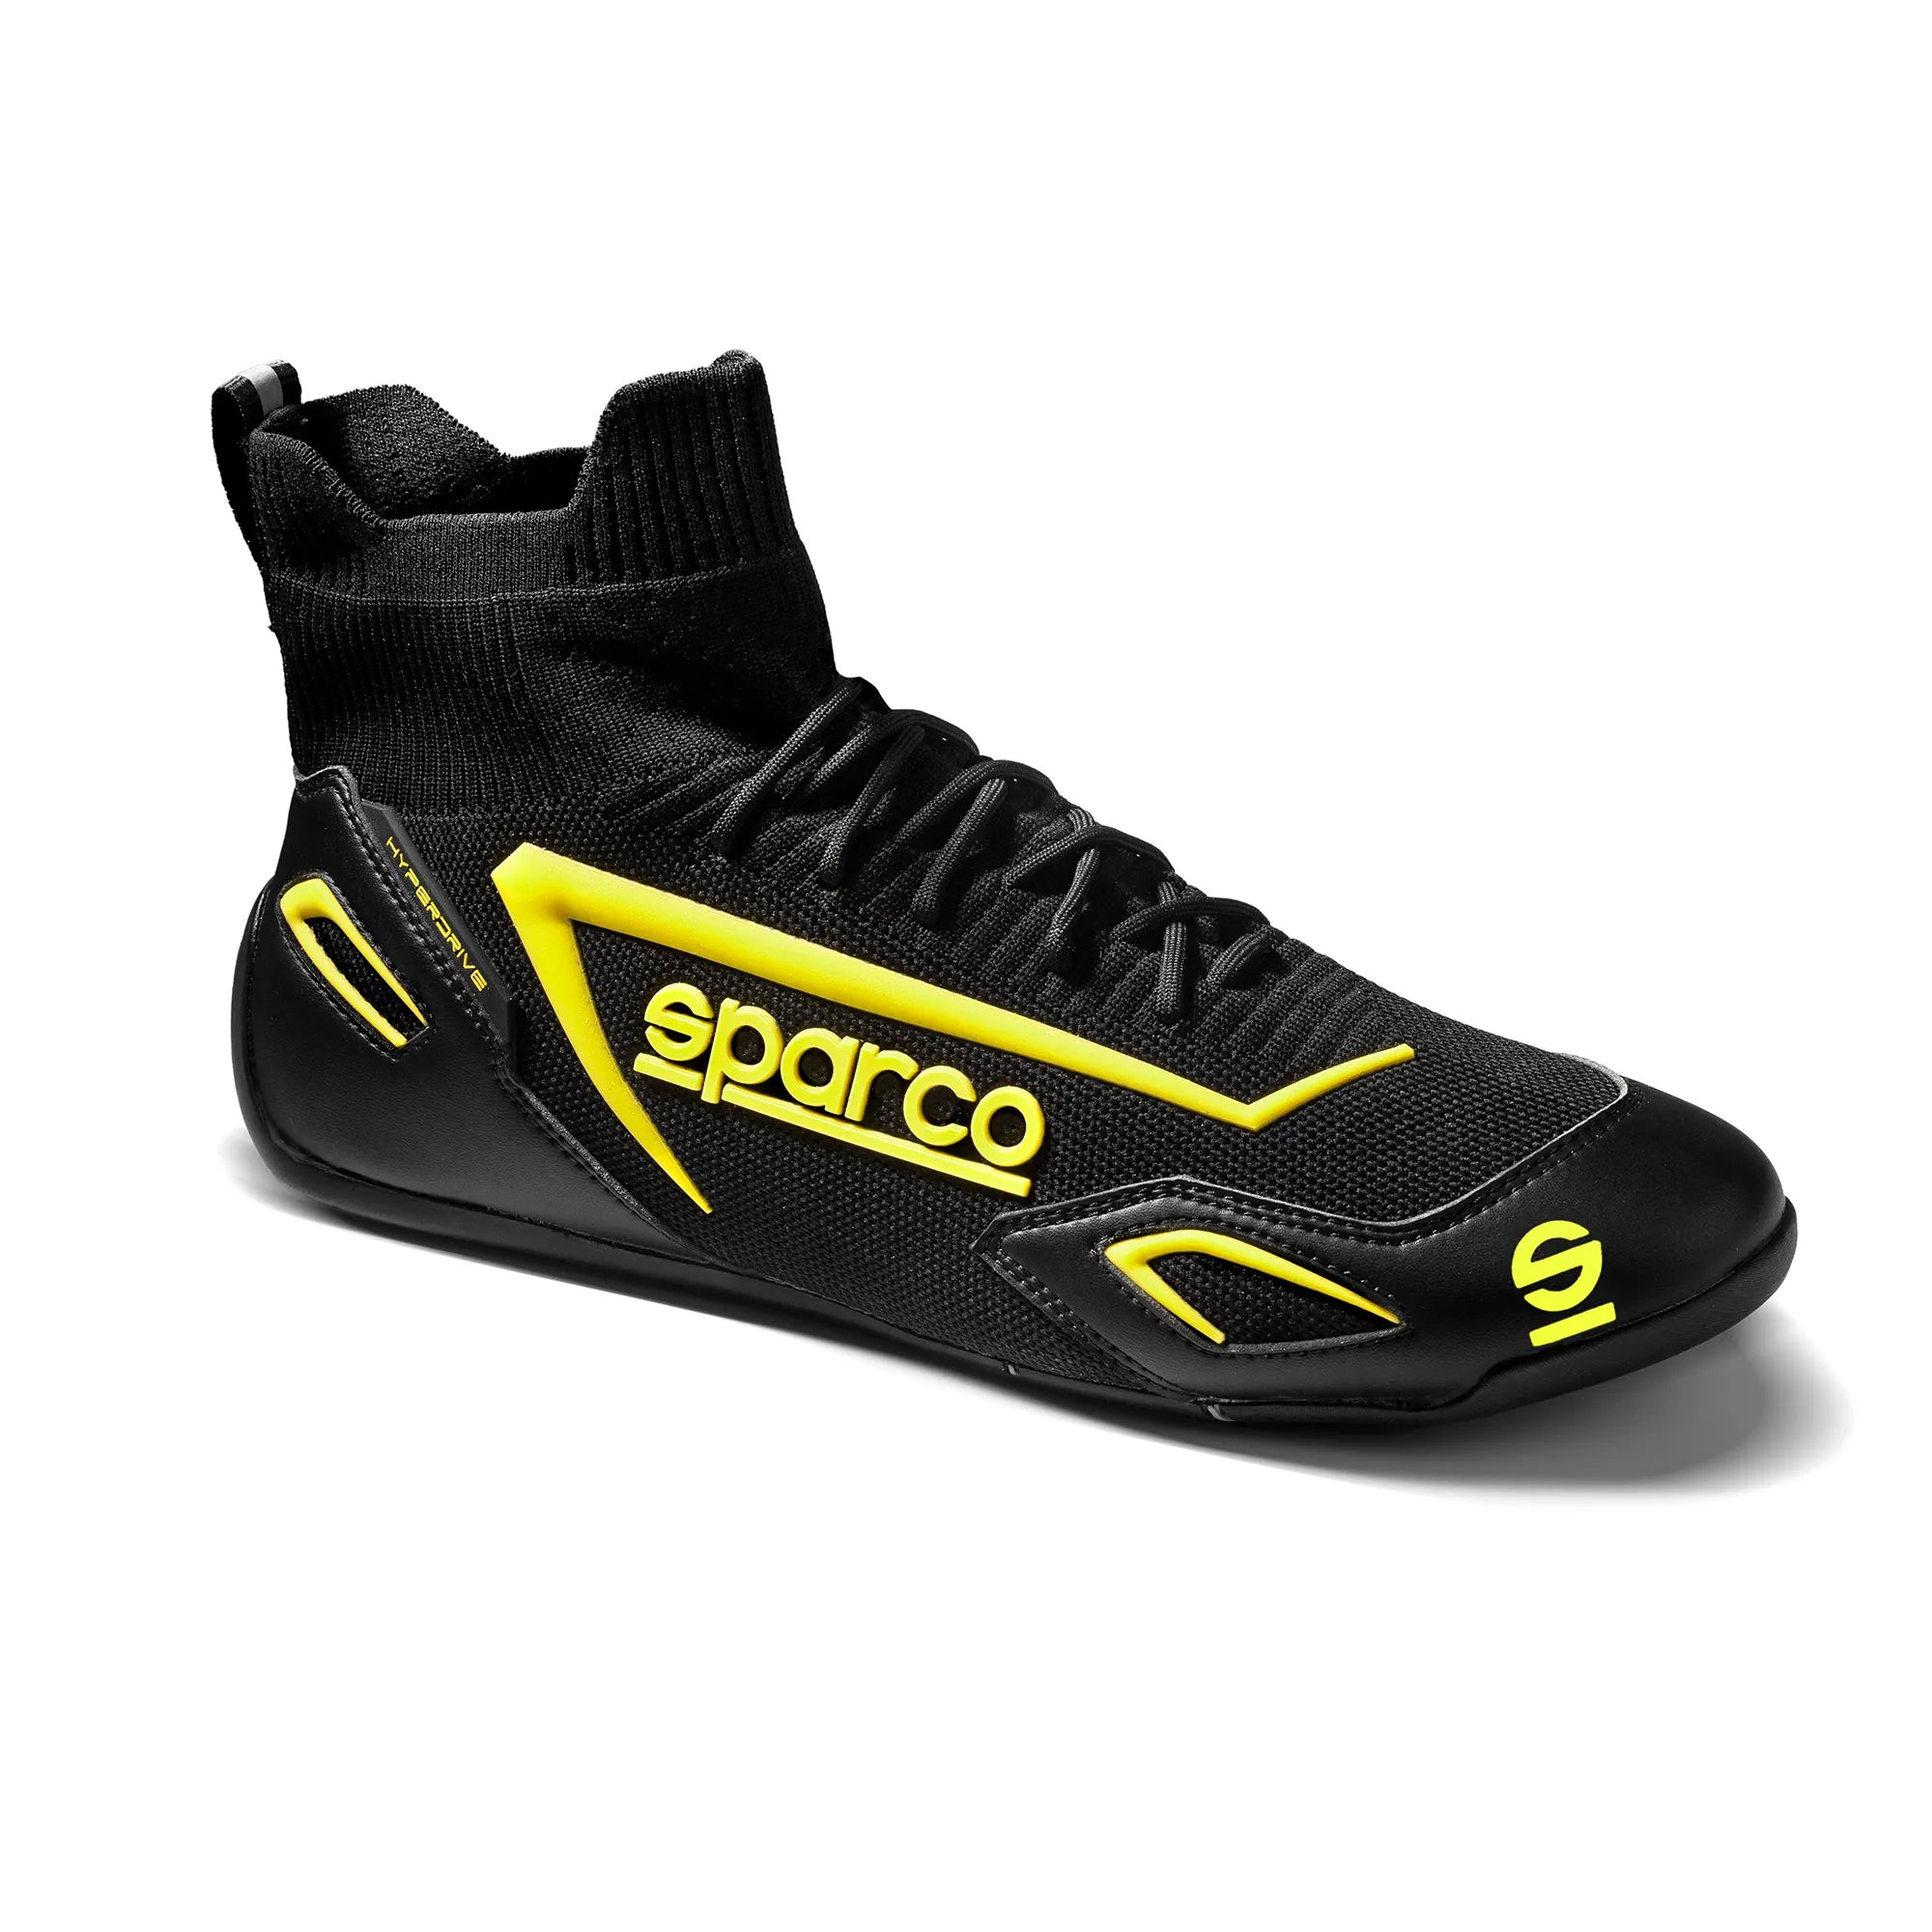 SPARCO 00129345NRGF Gaming sim racing shoes HYPERDRIVE, black/yellow, size 45 Photo-1 